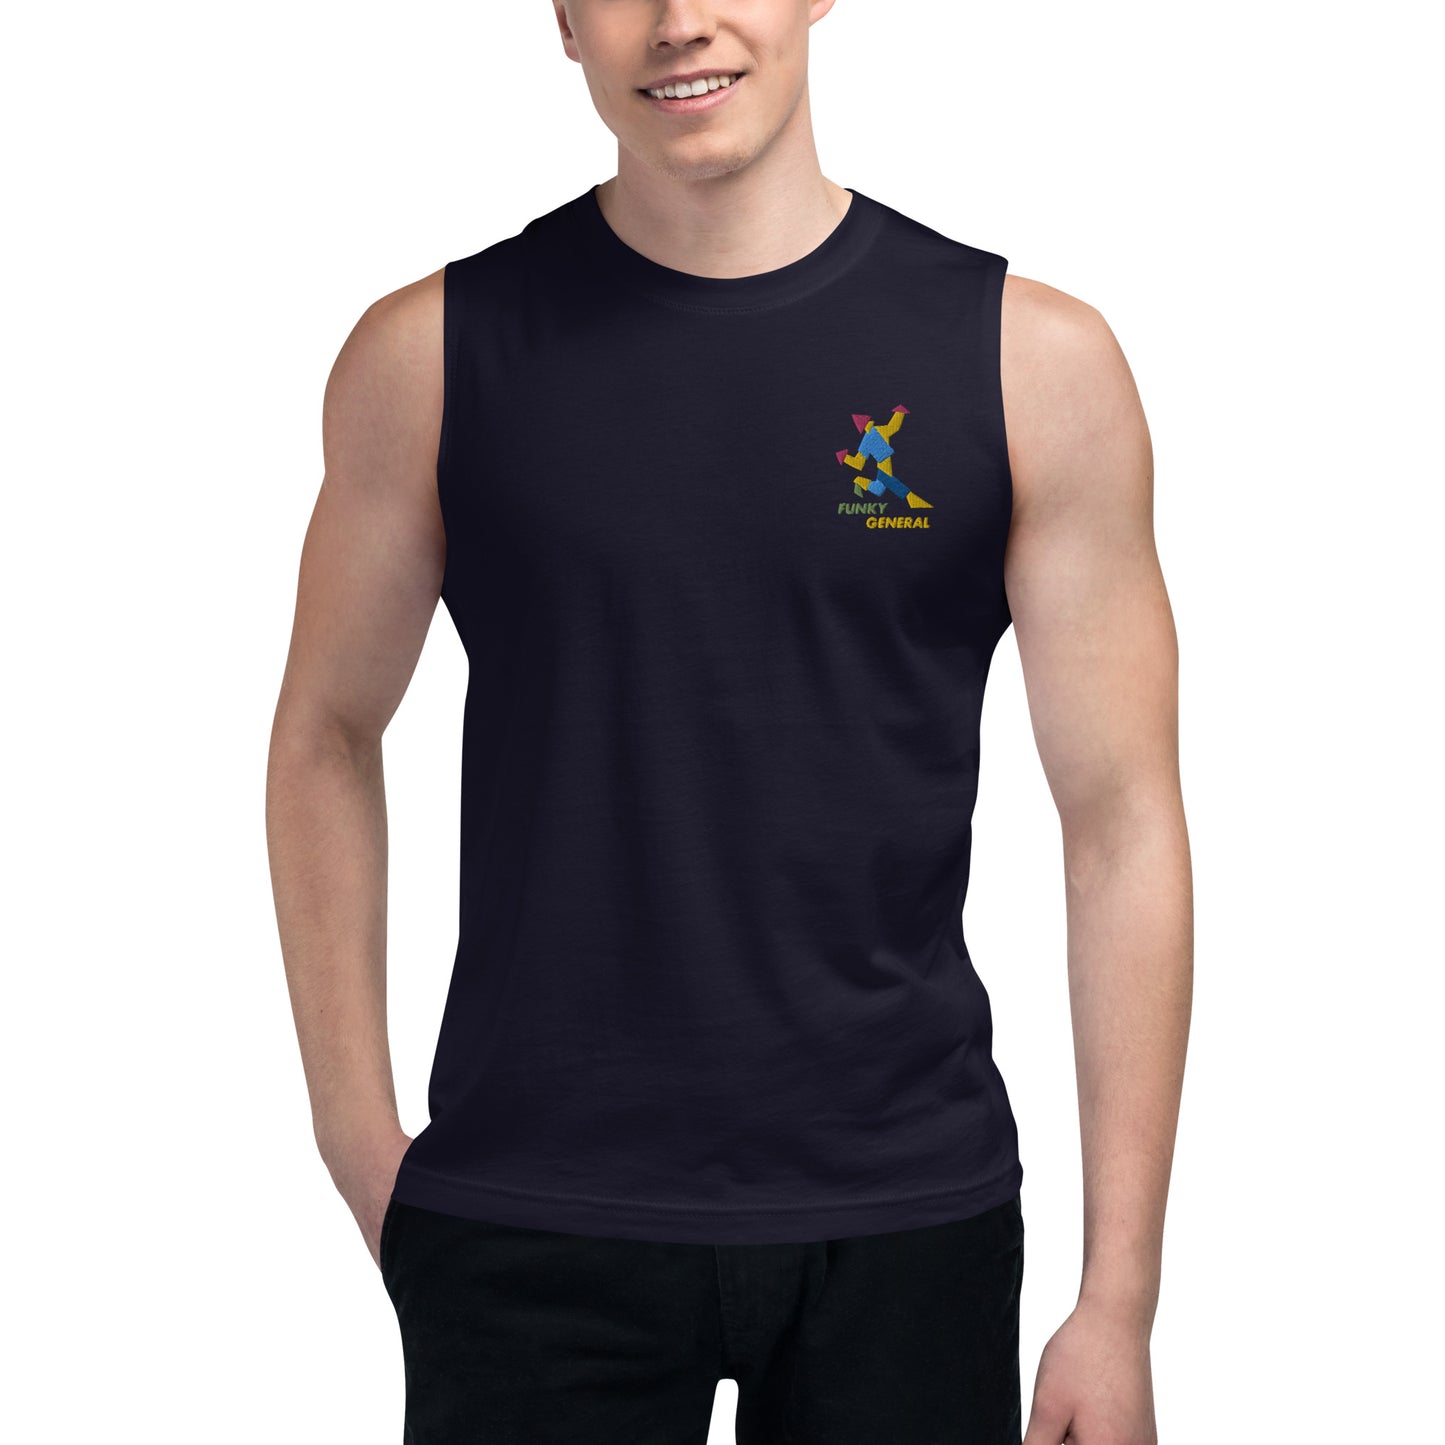 Funky General Muscle Shirt